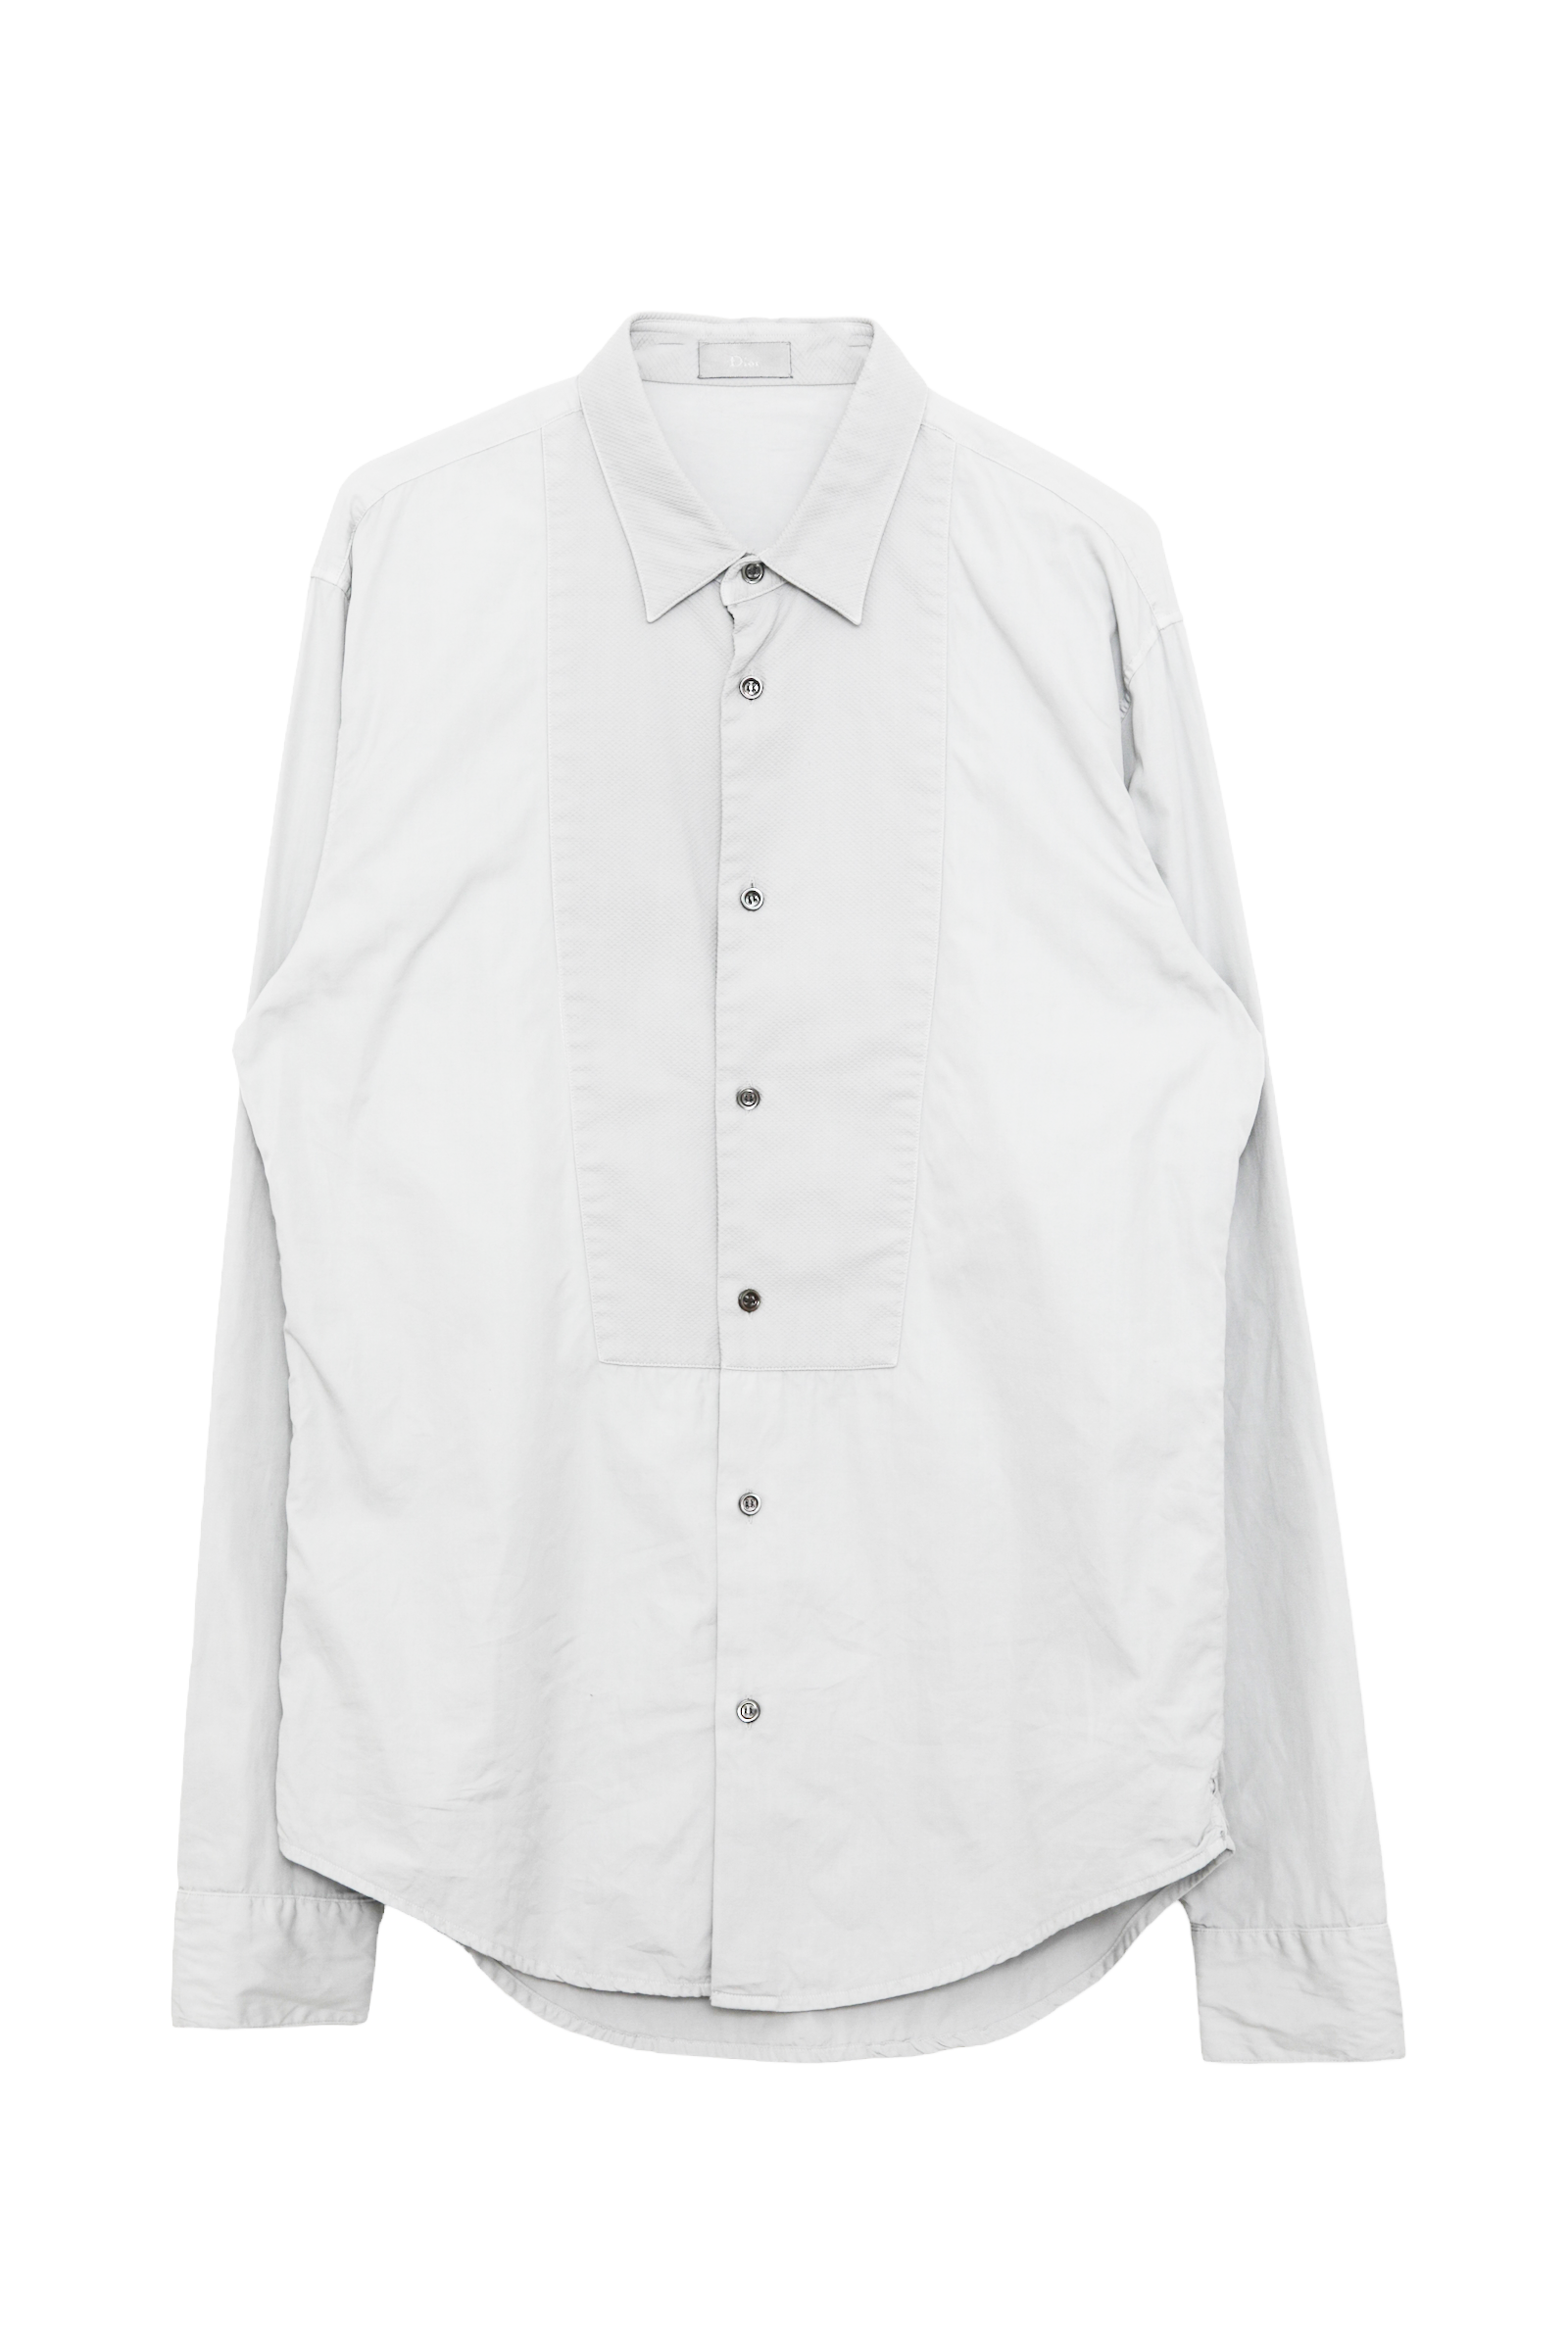 2005S/S DIOR HOMME BY HEDI SLIMONE SWITCHING COTTON SHIRT